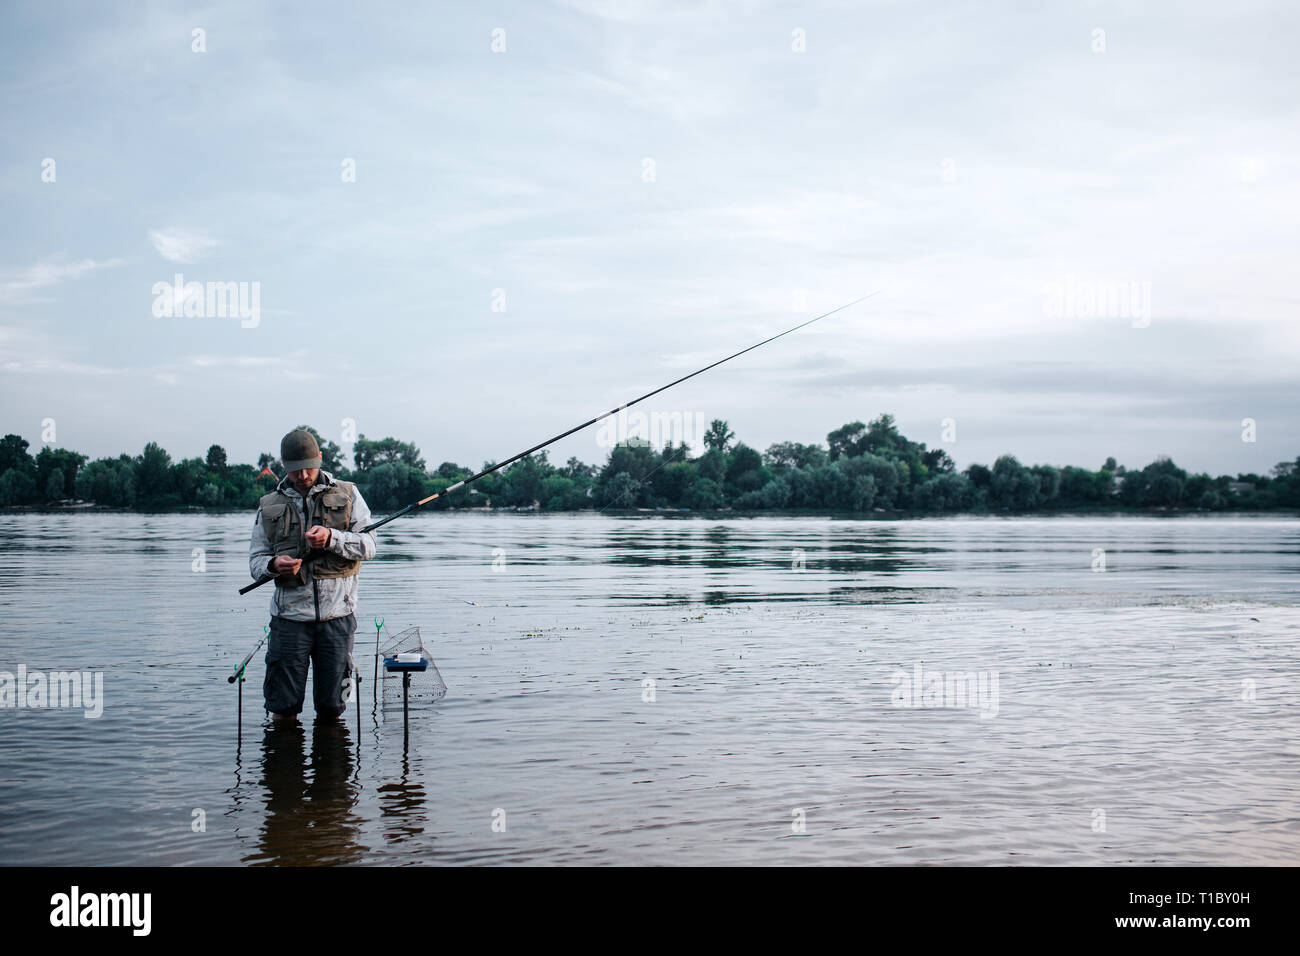 Young fisherman is standing barefeet in water and holding fly rod